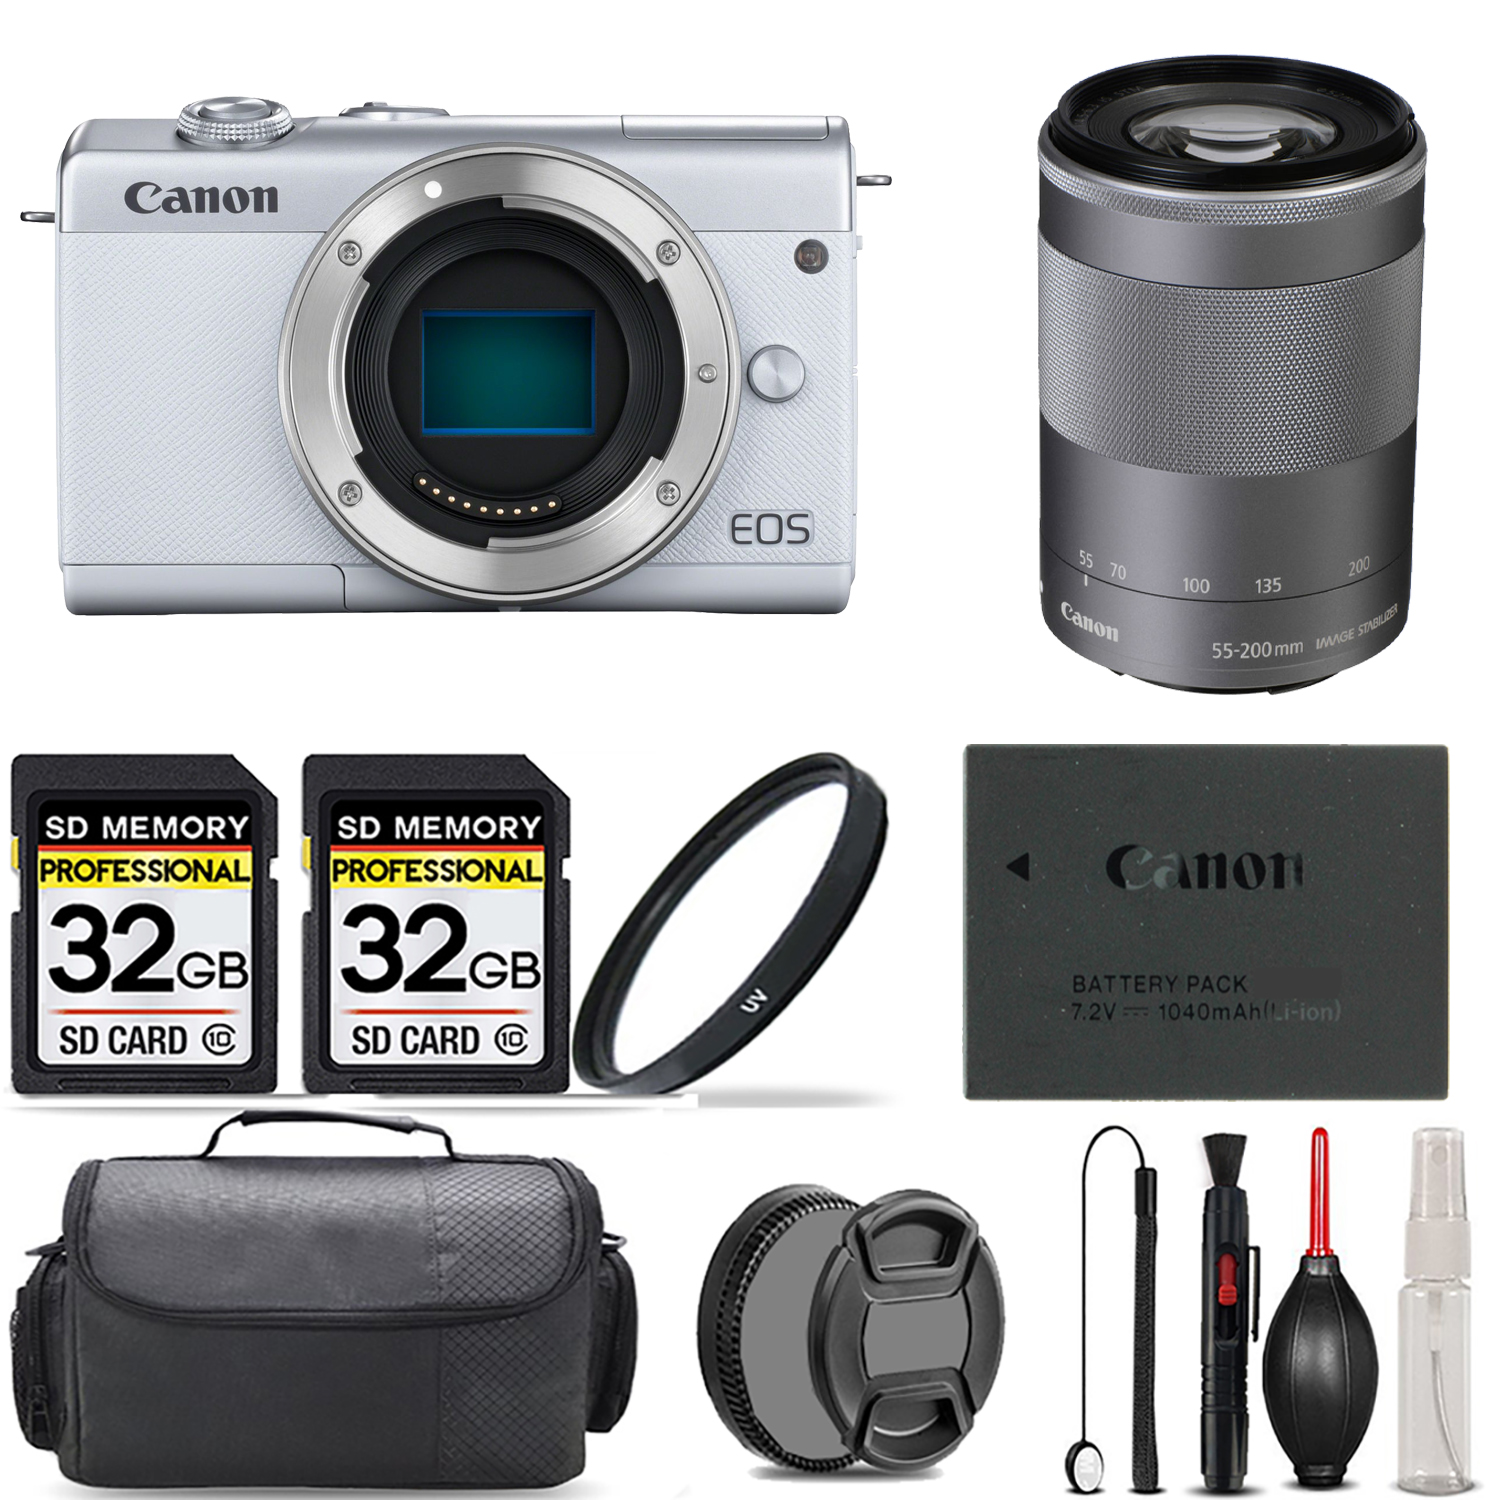 EOS M200 Camera (White) + 55-200mm IS STM Lens (Silver) + UV Filter + 64GB *FREE SHIPPING*